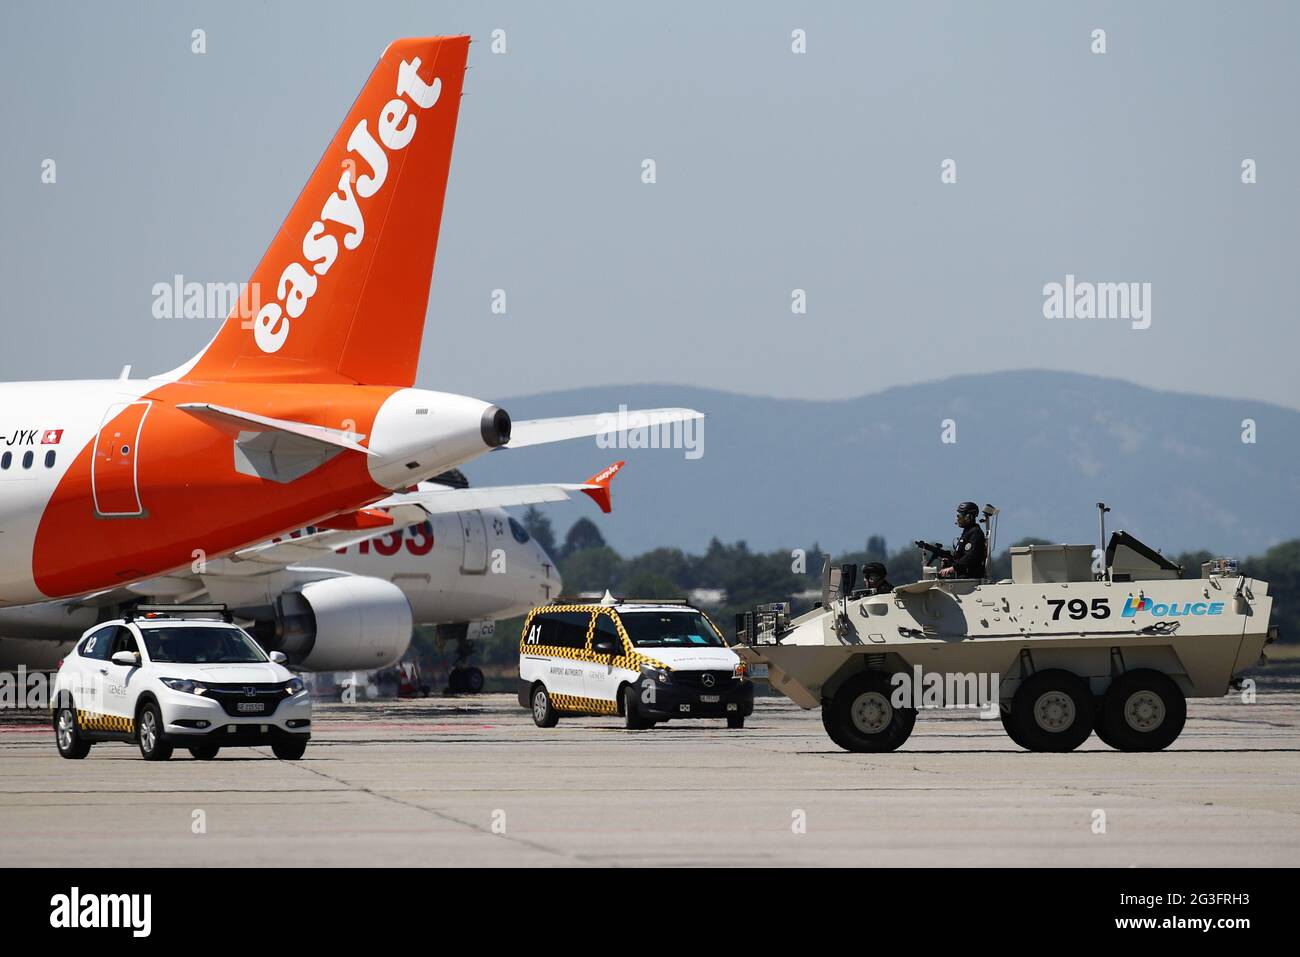 Geneva, Switzerland. 16th June, 2021. Police at Geneva Airport before the  arrival of Russia's President Vladimir Putin for a Russia-United States  summit. Credit: Sergei Bobylev/TASS/Alamy Live News Stock Photo - Alamy